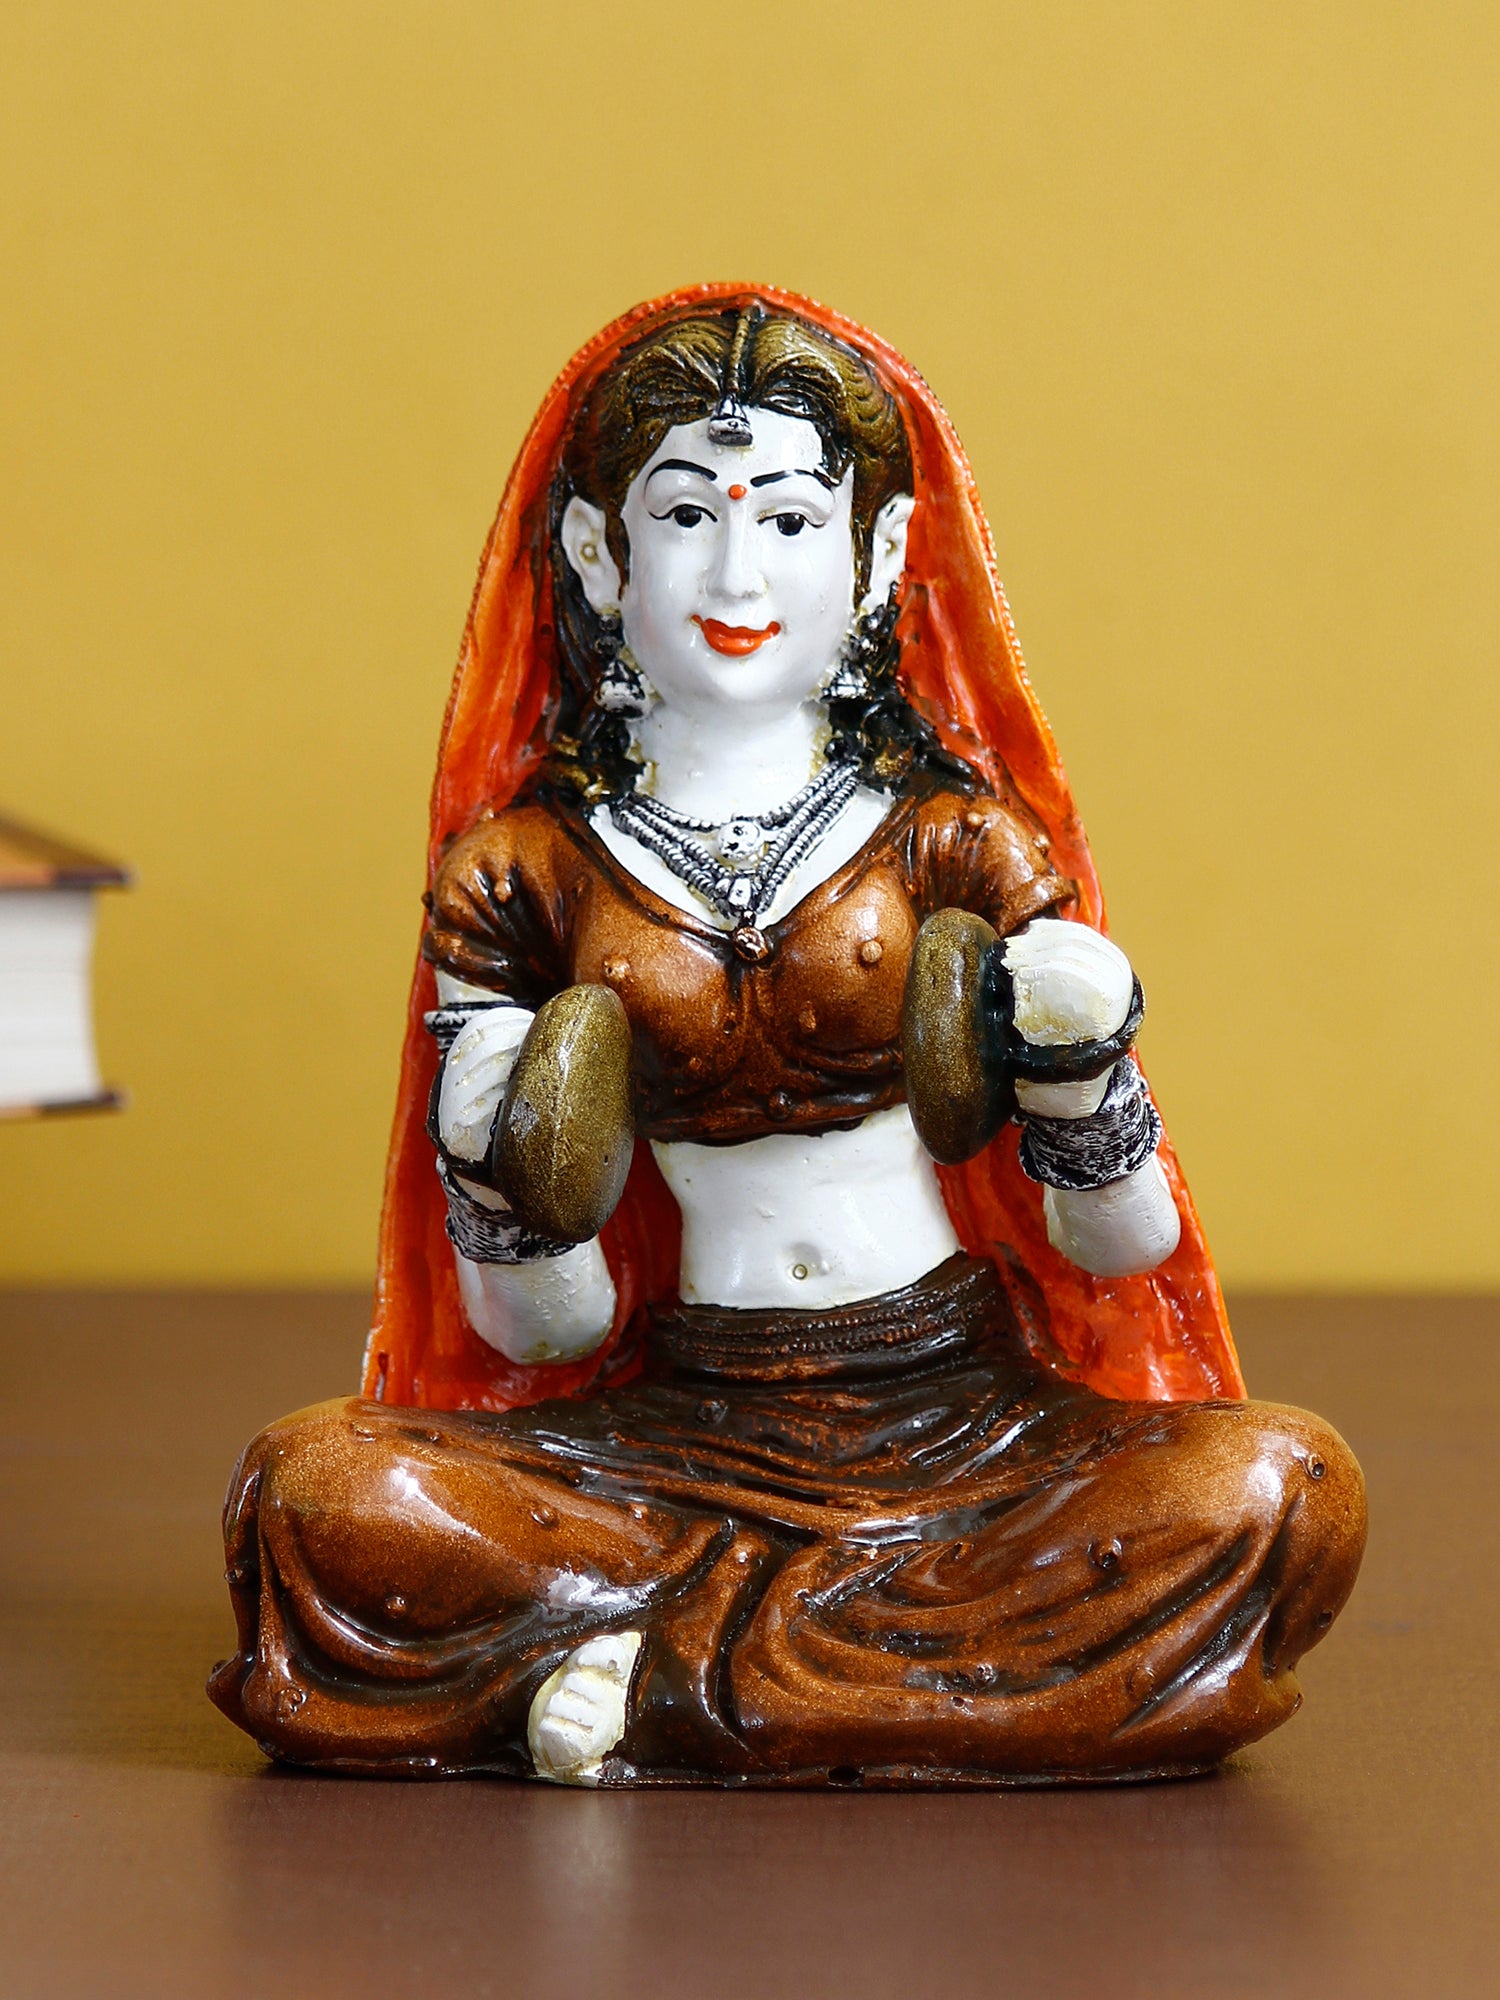 Polyresin Rajasthani Women Statue Playing Hand Cymbals Decorative Human Figurines Home Decor Showpiece